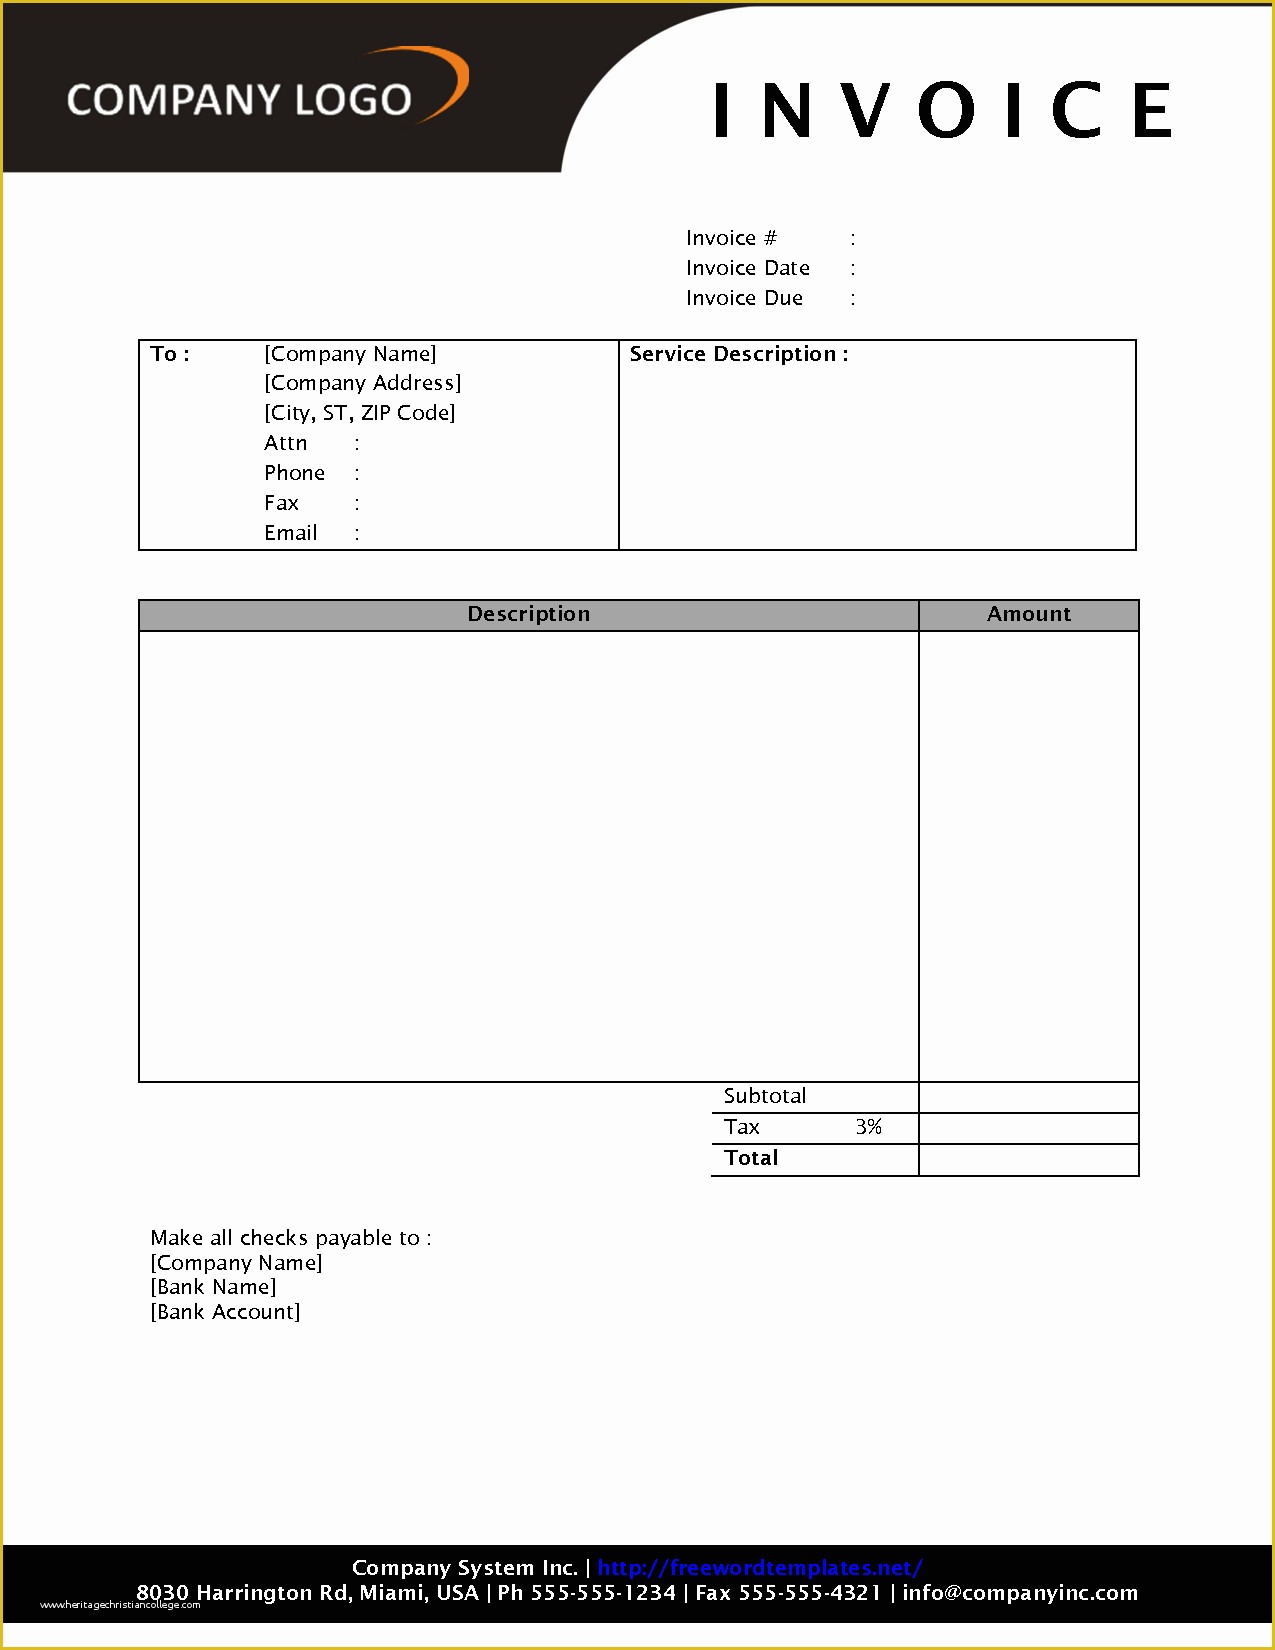 Html Invoice Template Free Download Of Download Invoice Template Invoice Design Inspiration